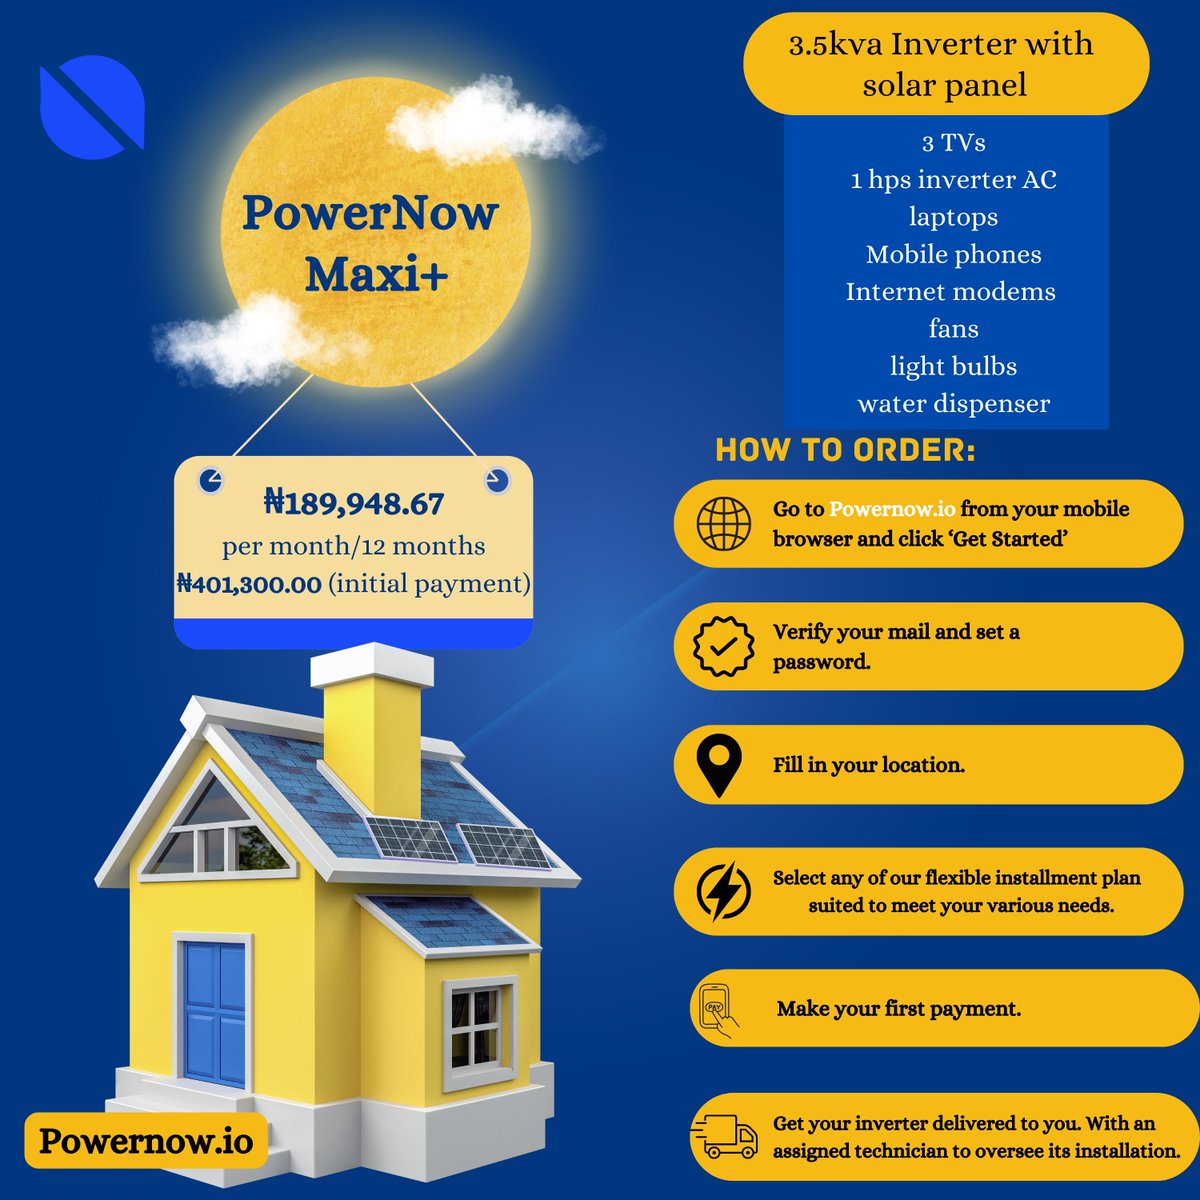 Our 3.5kVA inverter is now within reach with our flexible installment plan. 

Say goodbye to upfront costs and hello to reliable, sustainable energy. Ready to make the switch? Visit powernow.io to get started!

#InstallmentPlan #InverterPower #AffordableEnergy